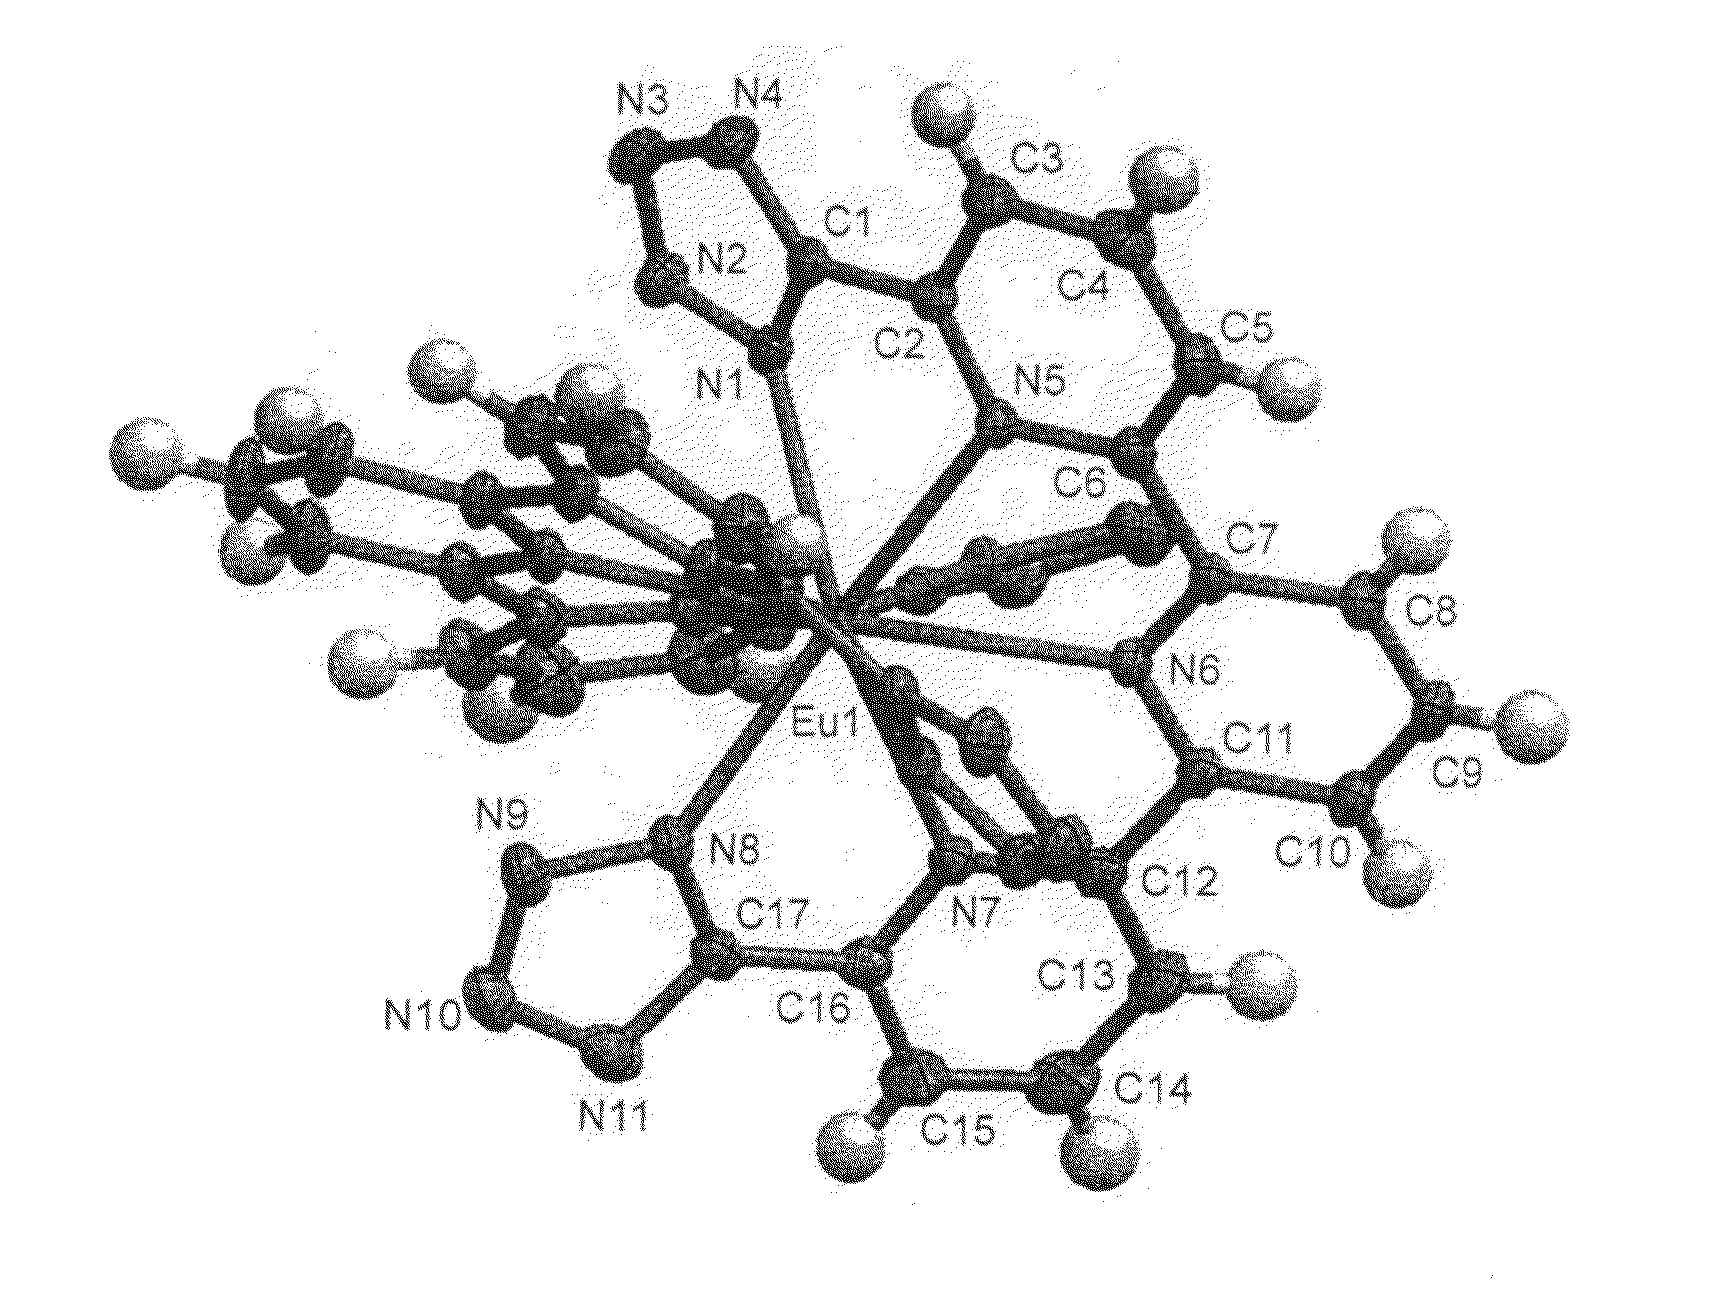 Compounds useful as ligands and particularly as organic chromophores for complexing lanthanides and applications thereof